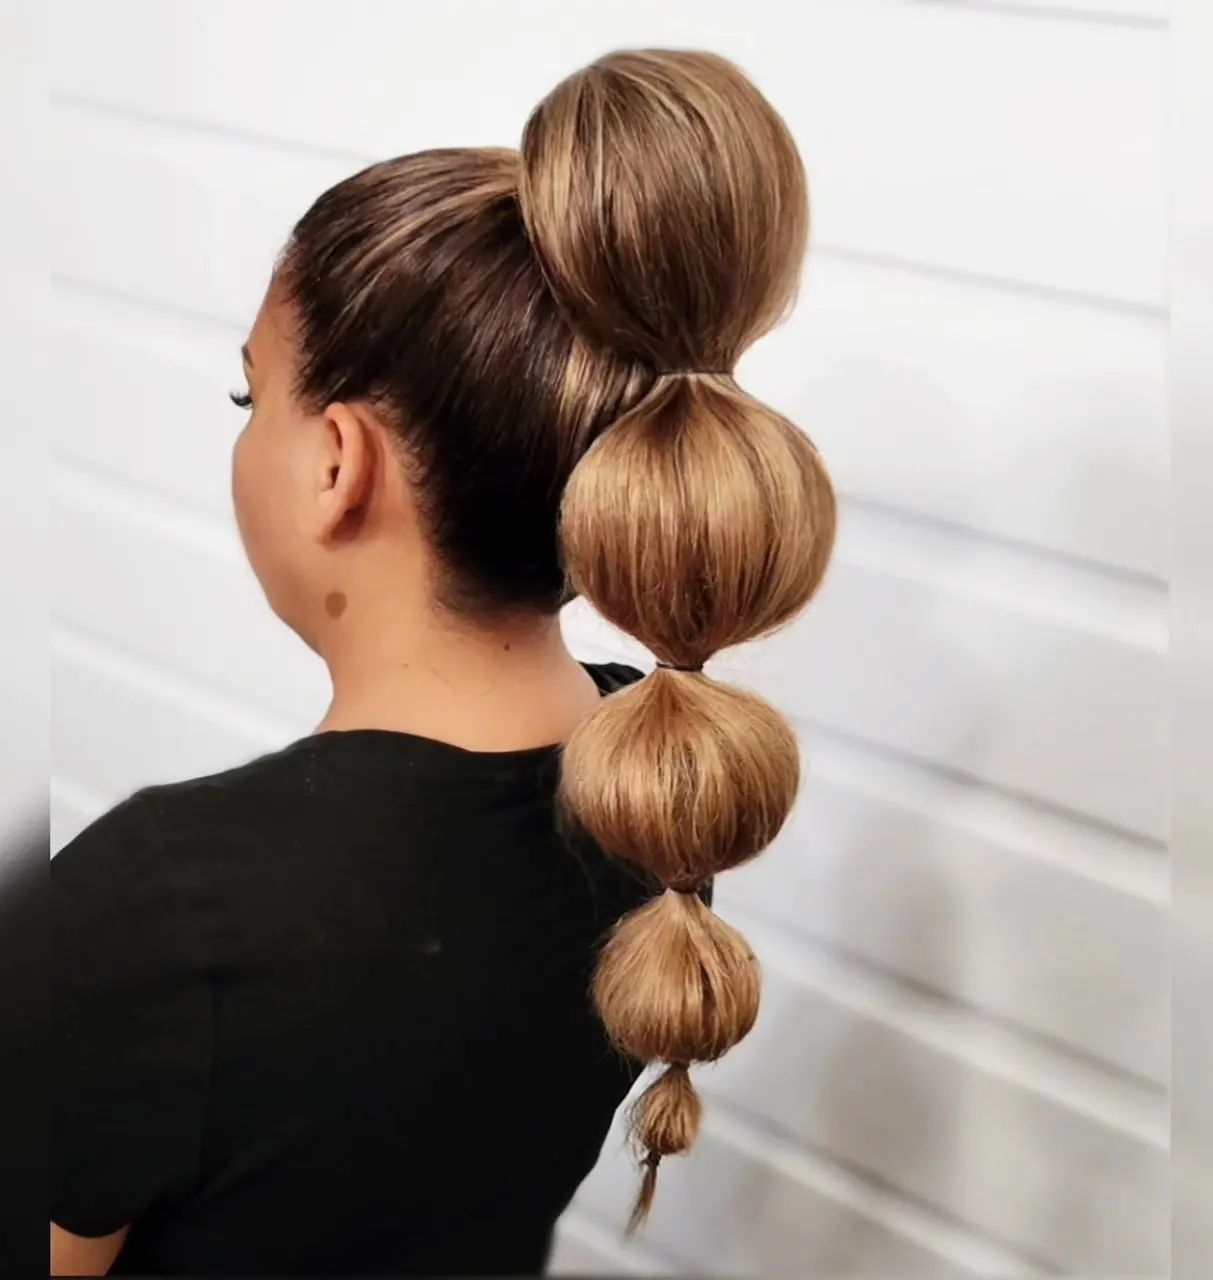 The Mermaid Bubble Ponytail